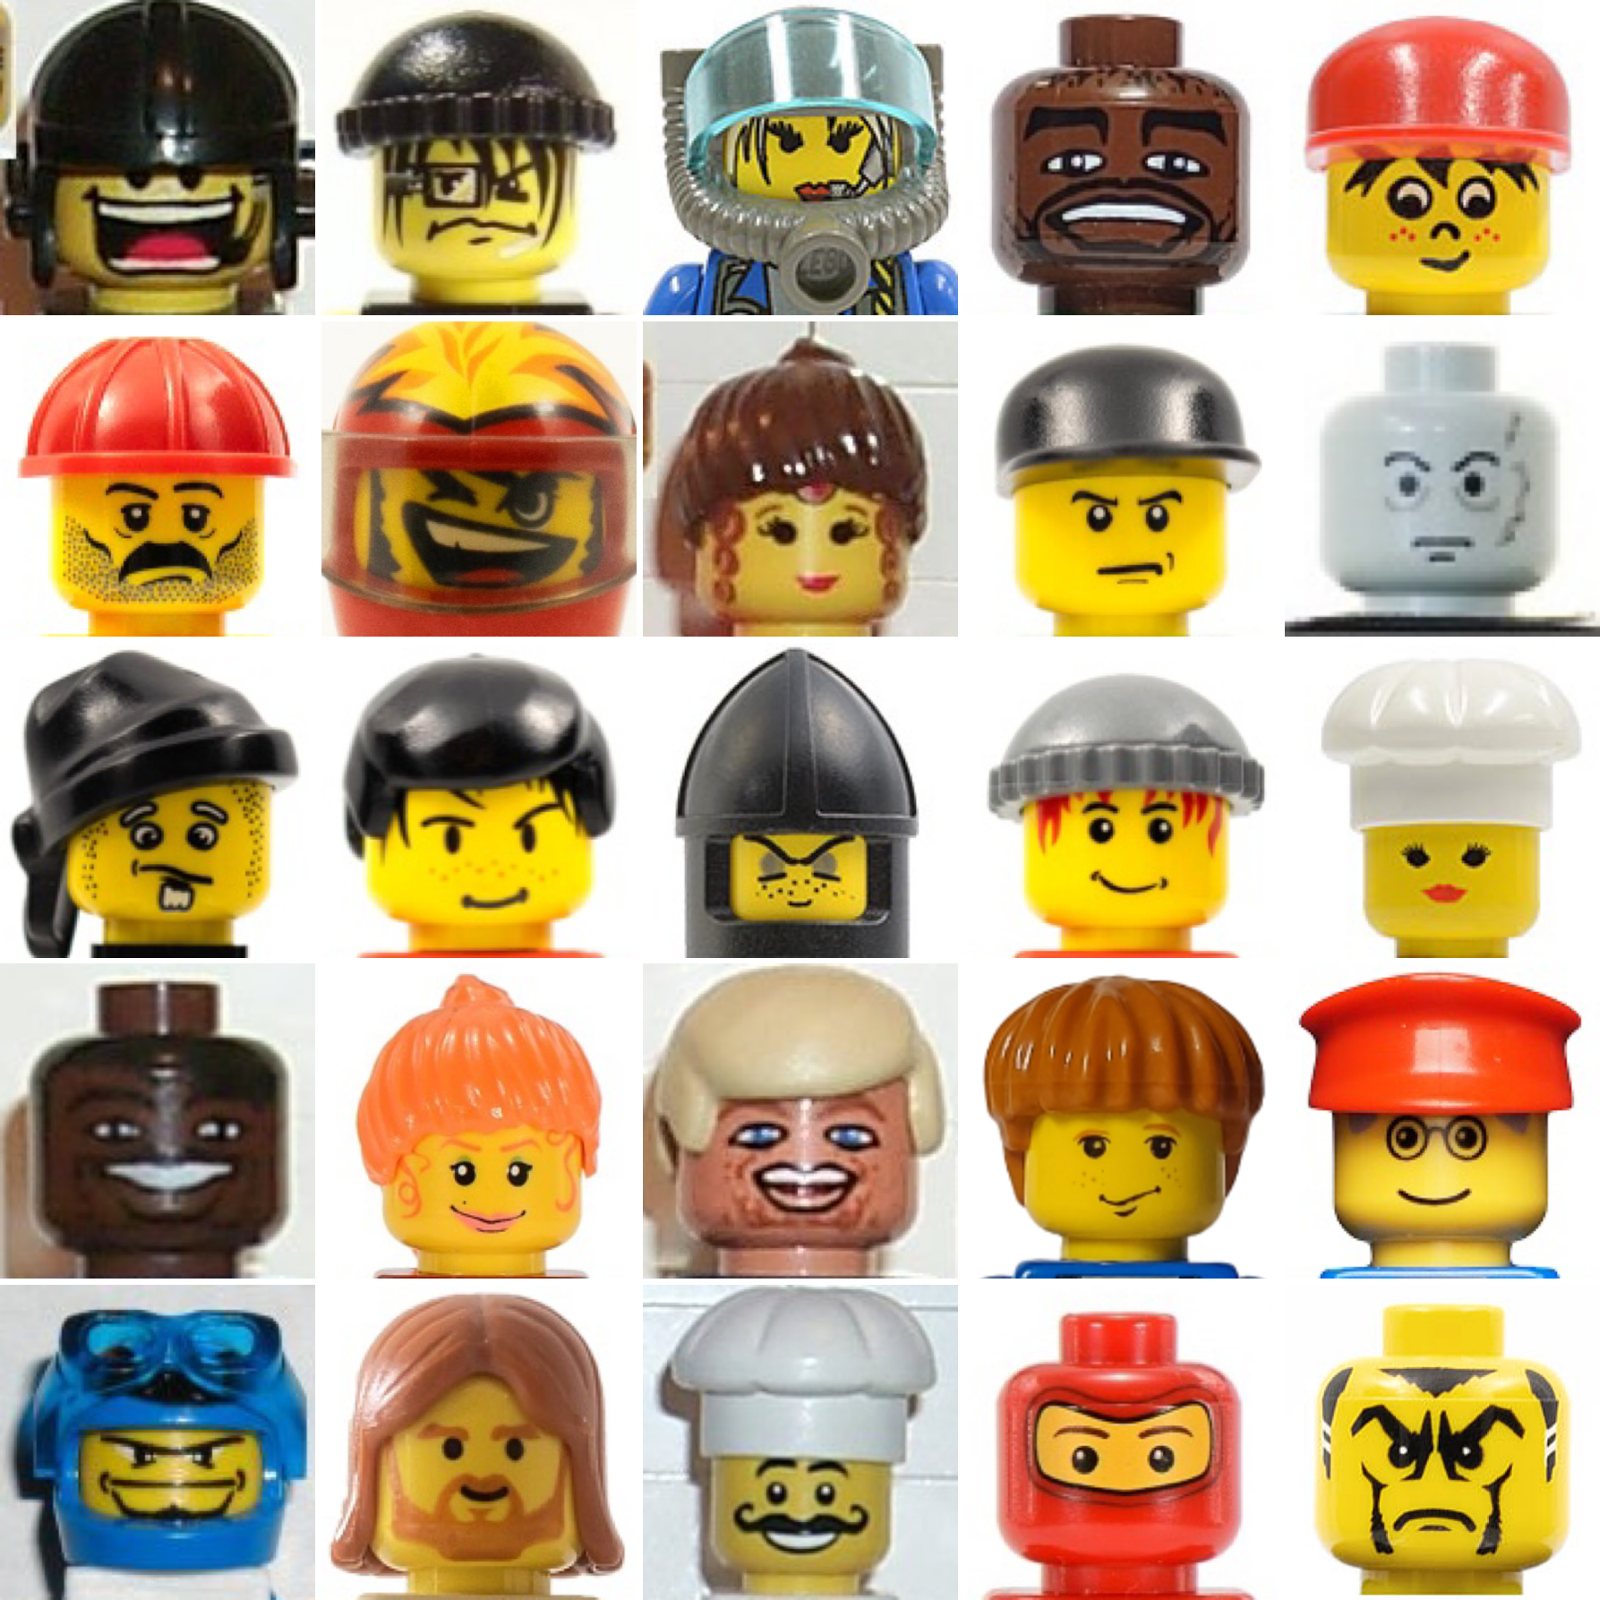 happy-shopping-lego-new-minifig-heads-city-series-yellow-flesh-pirate